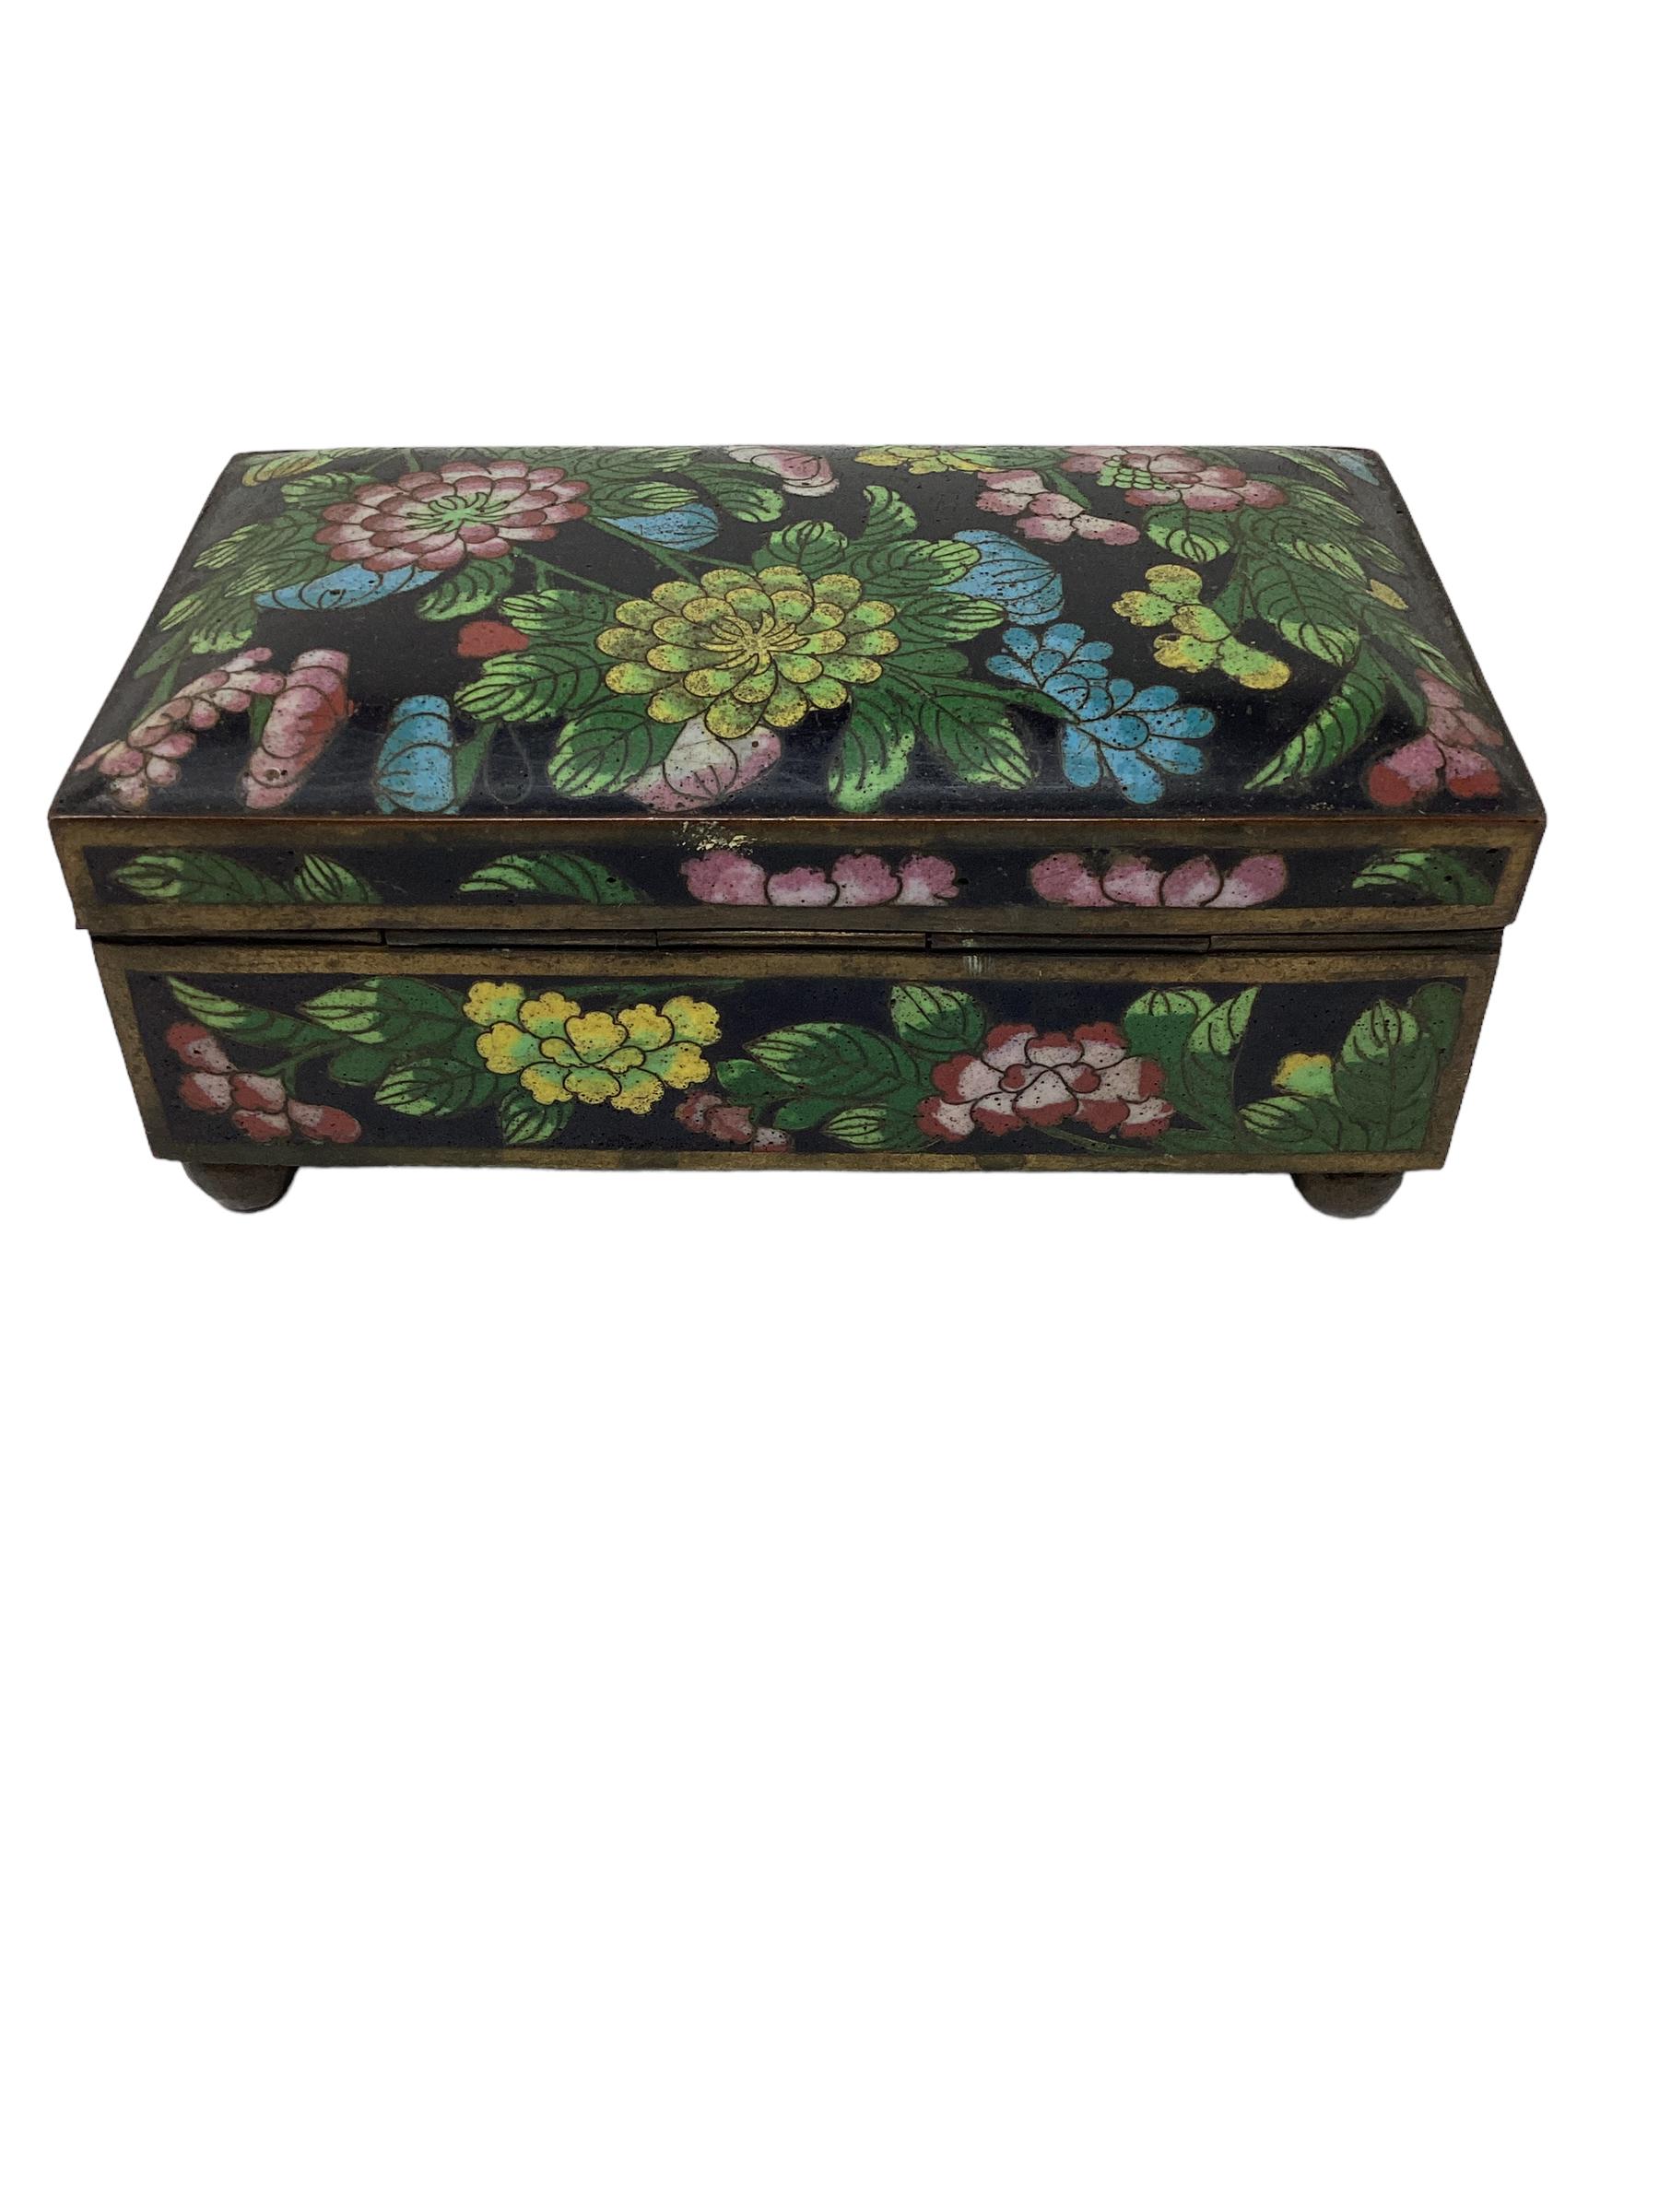 Early 20th Century Chinese Export Cloisonné Box For Sale